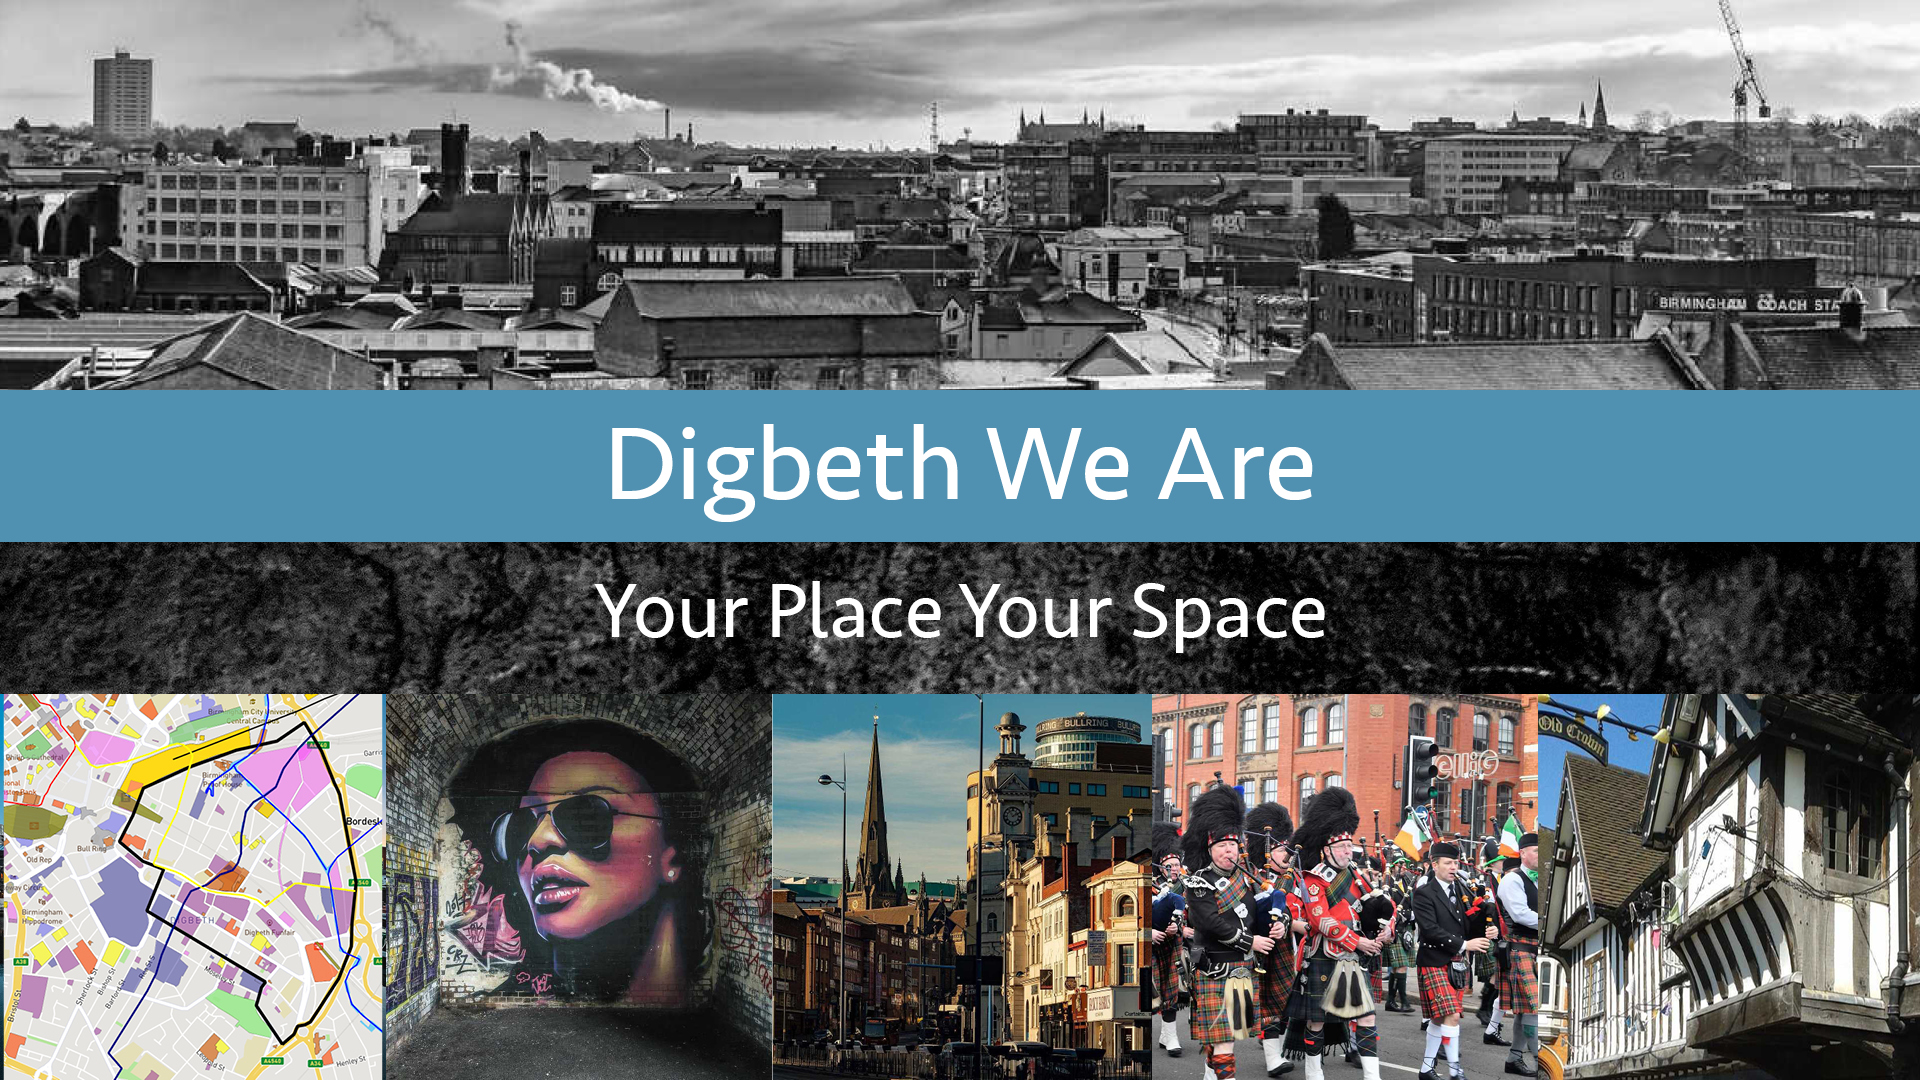 Digbeth We Are - Engaging, involving and inspiring community!